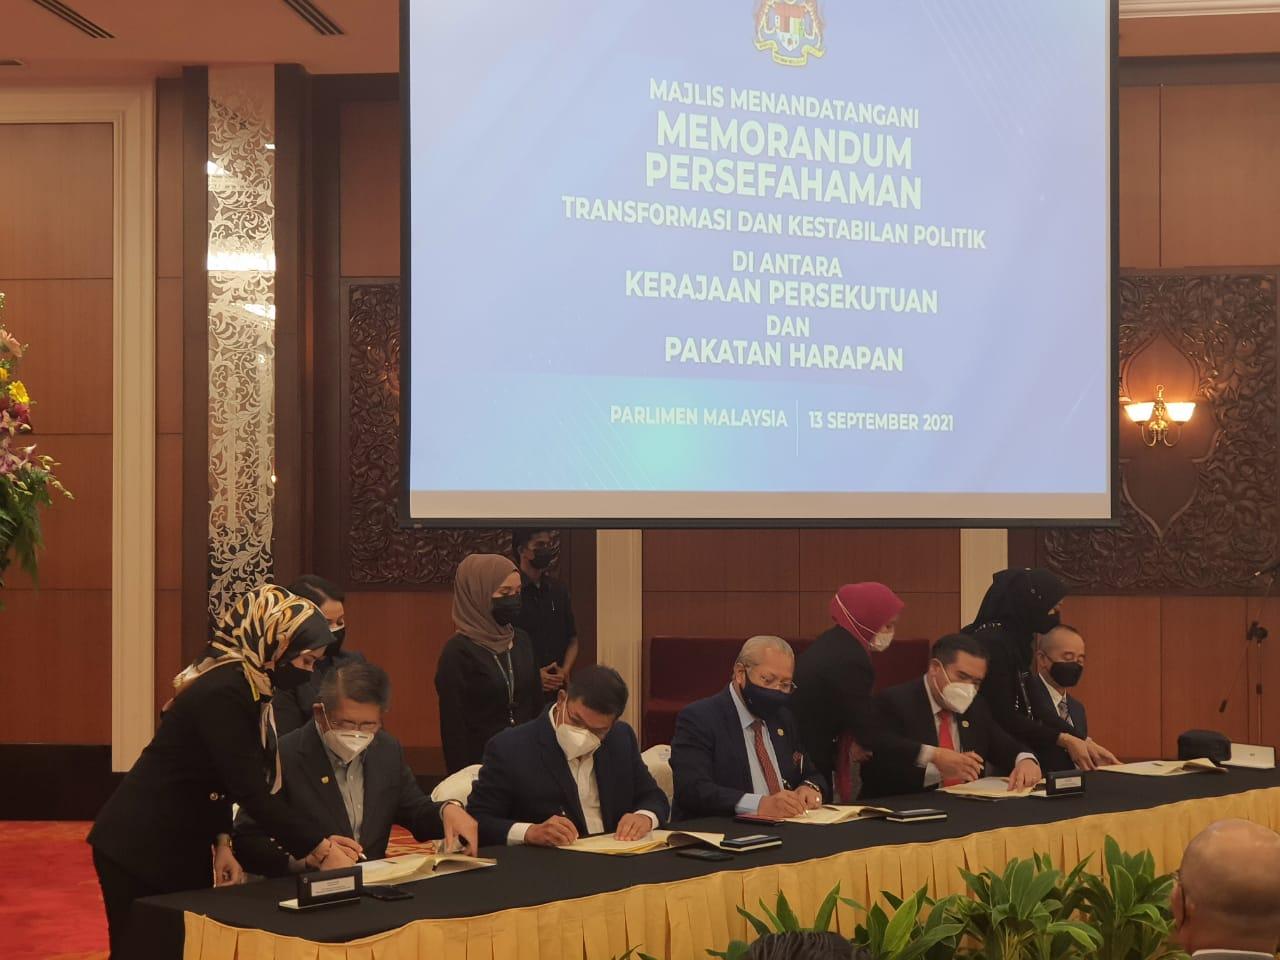 Representatives from the government and opposition sign a memorandum of understanding at Parliament in Kuala Lumpur today.